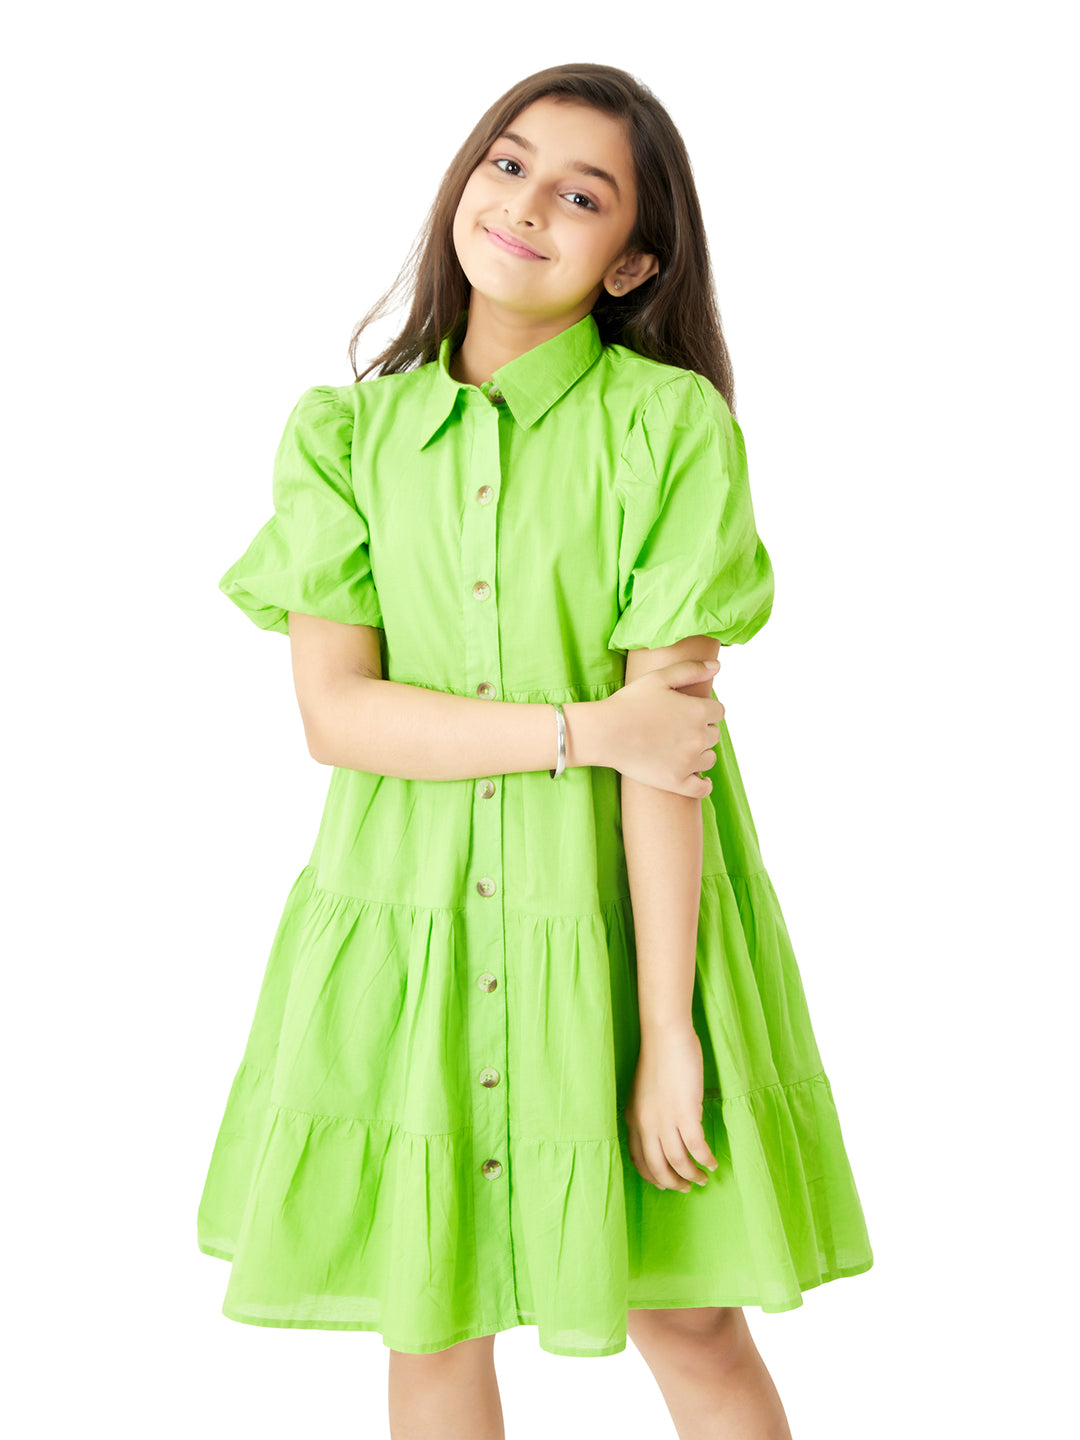 Olele® Girls Lucy Shirt Cotton Dress - Neon Green for 4 to 14 Years Kids